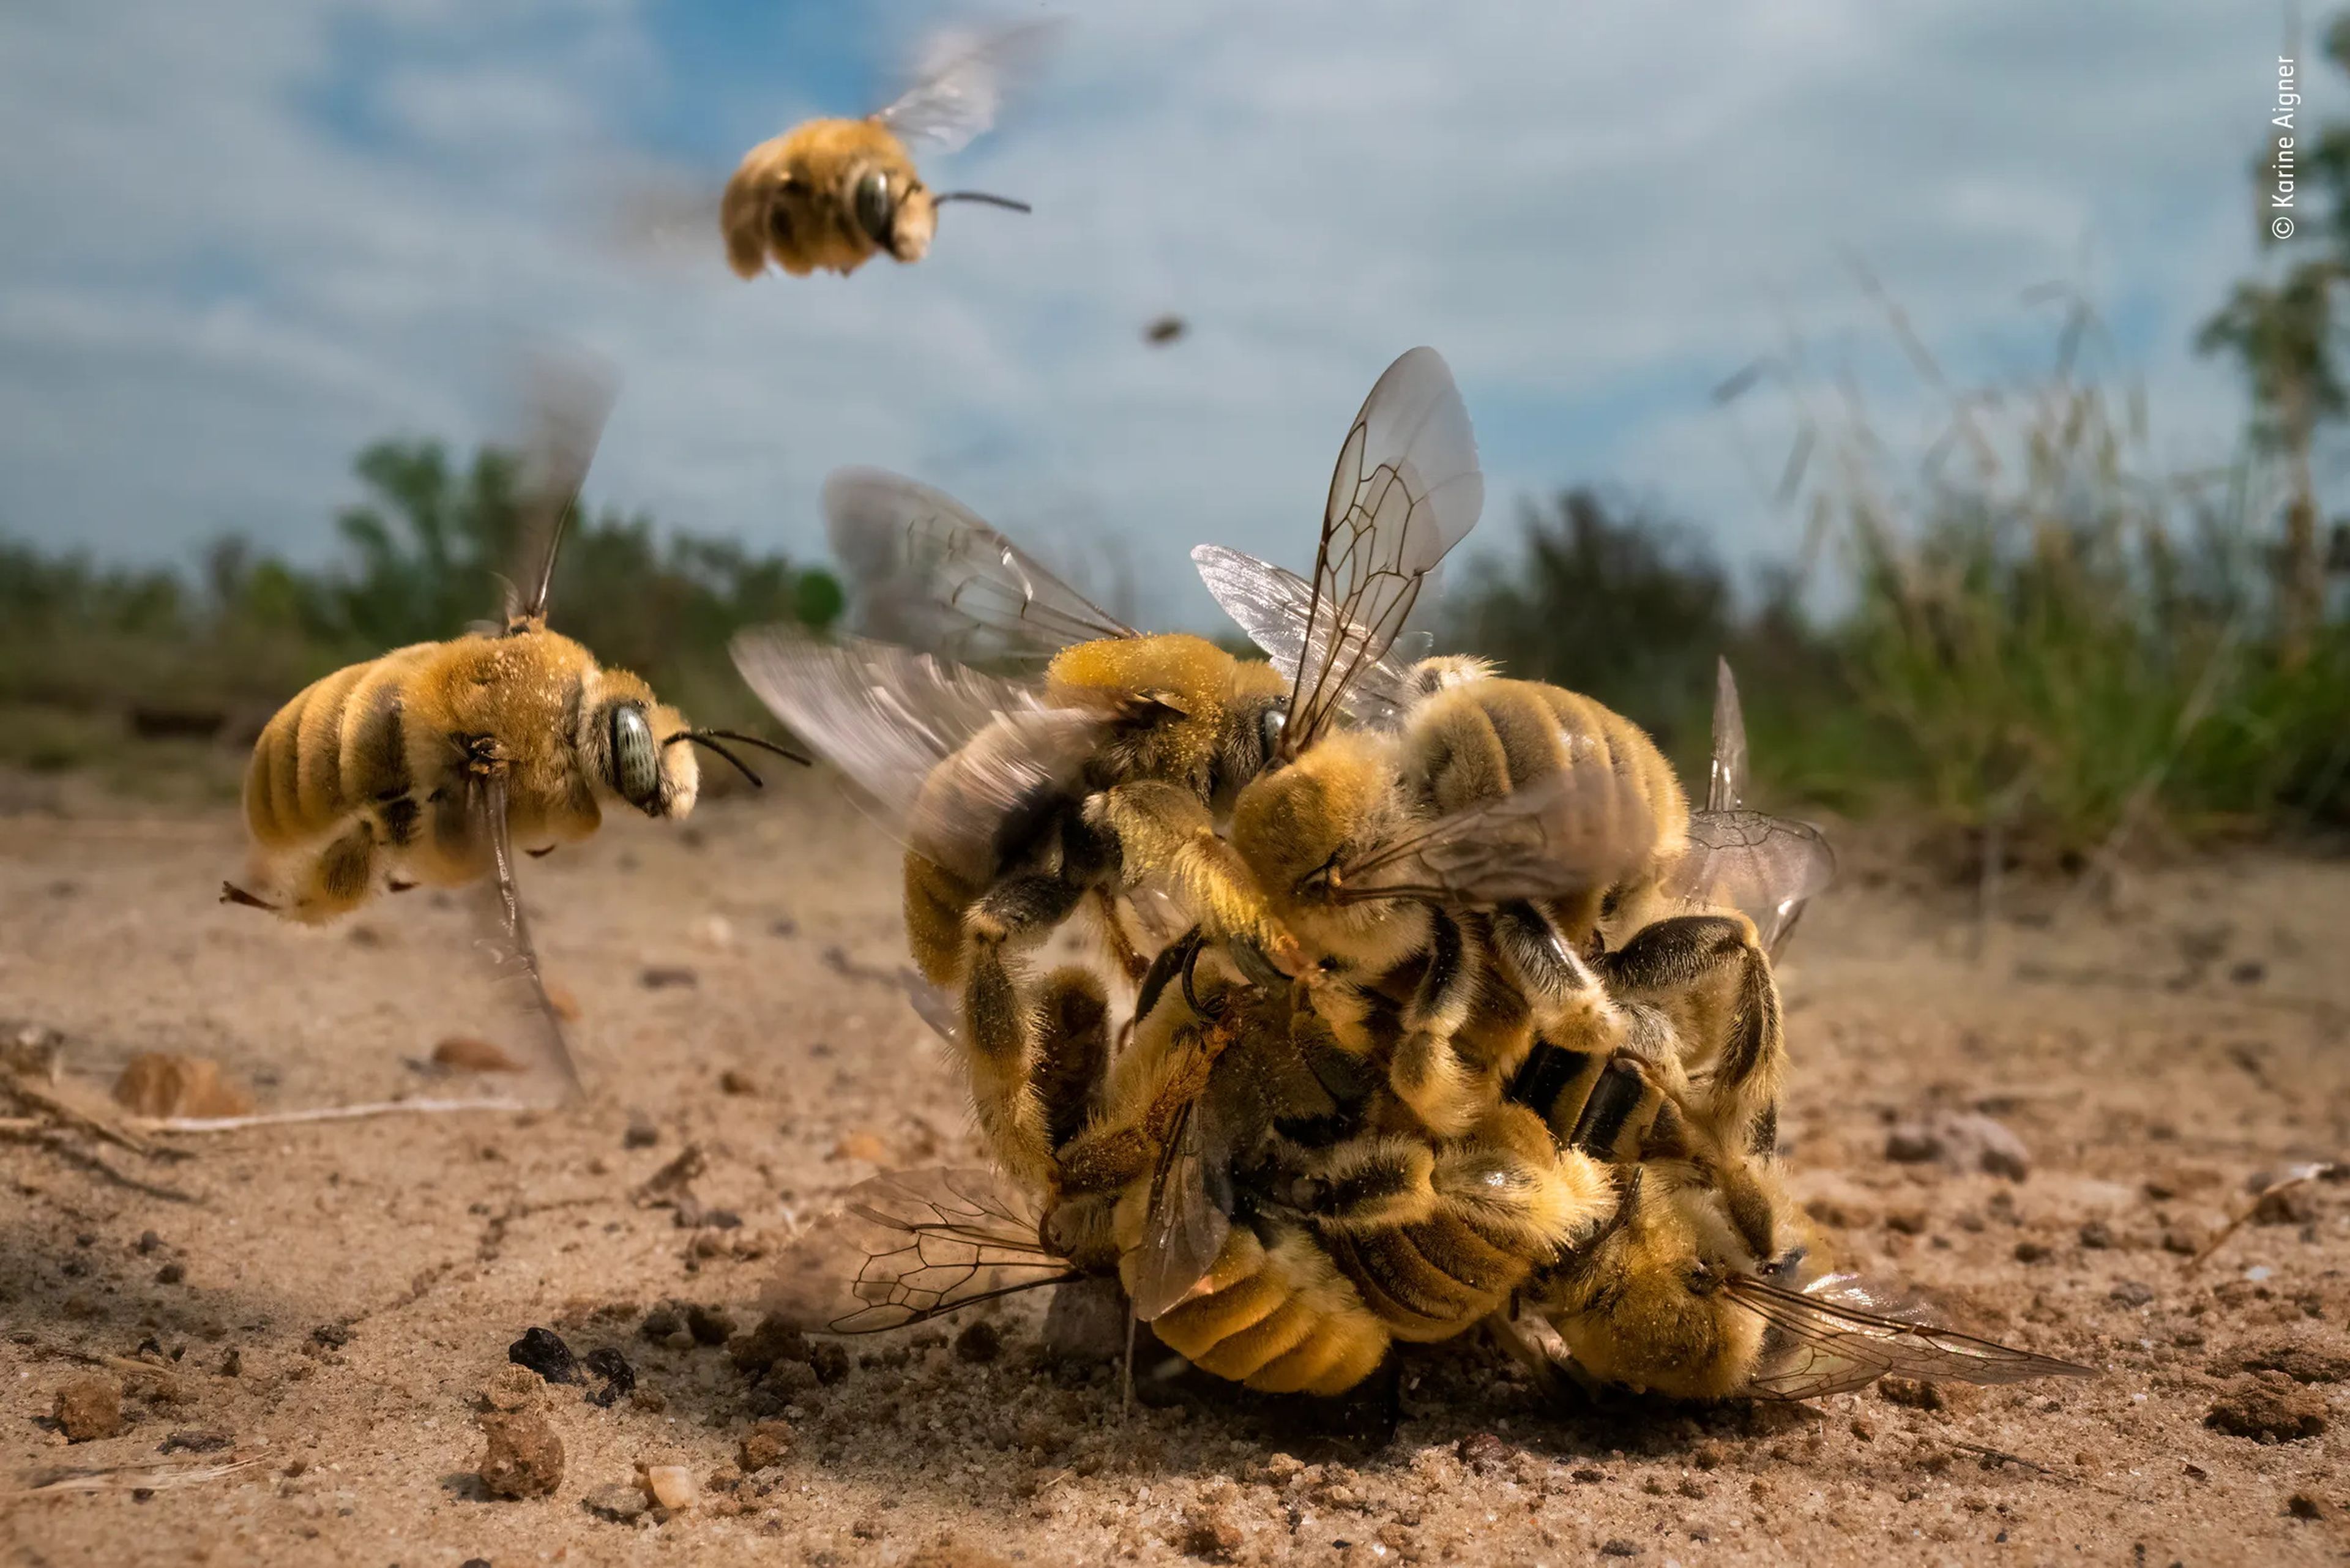 bees swarm in a ball on the ground